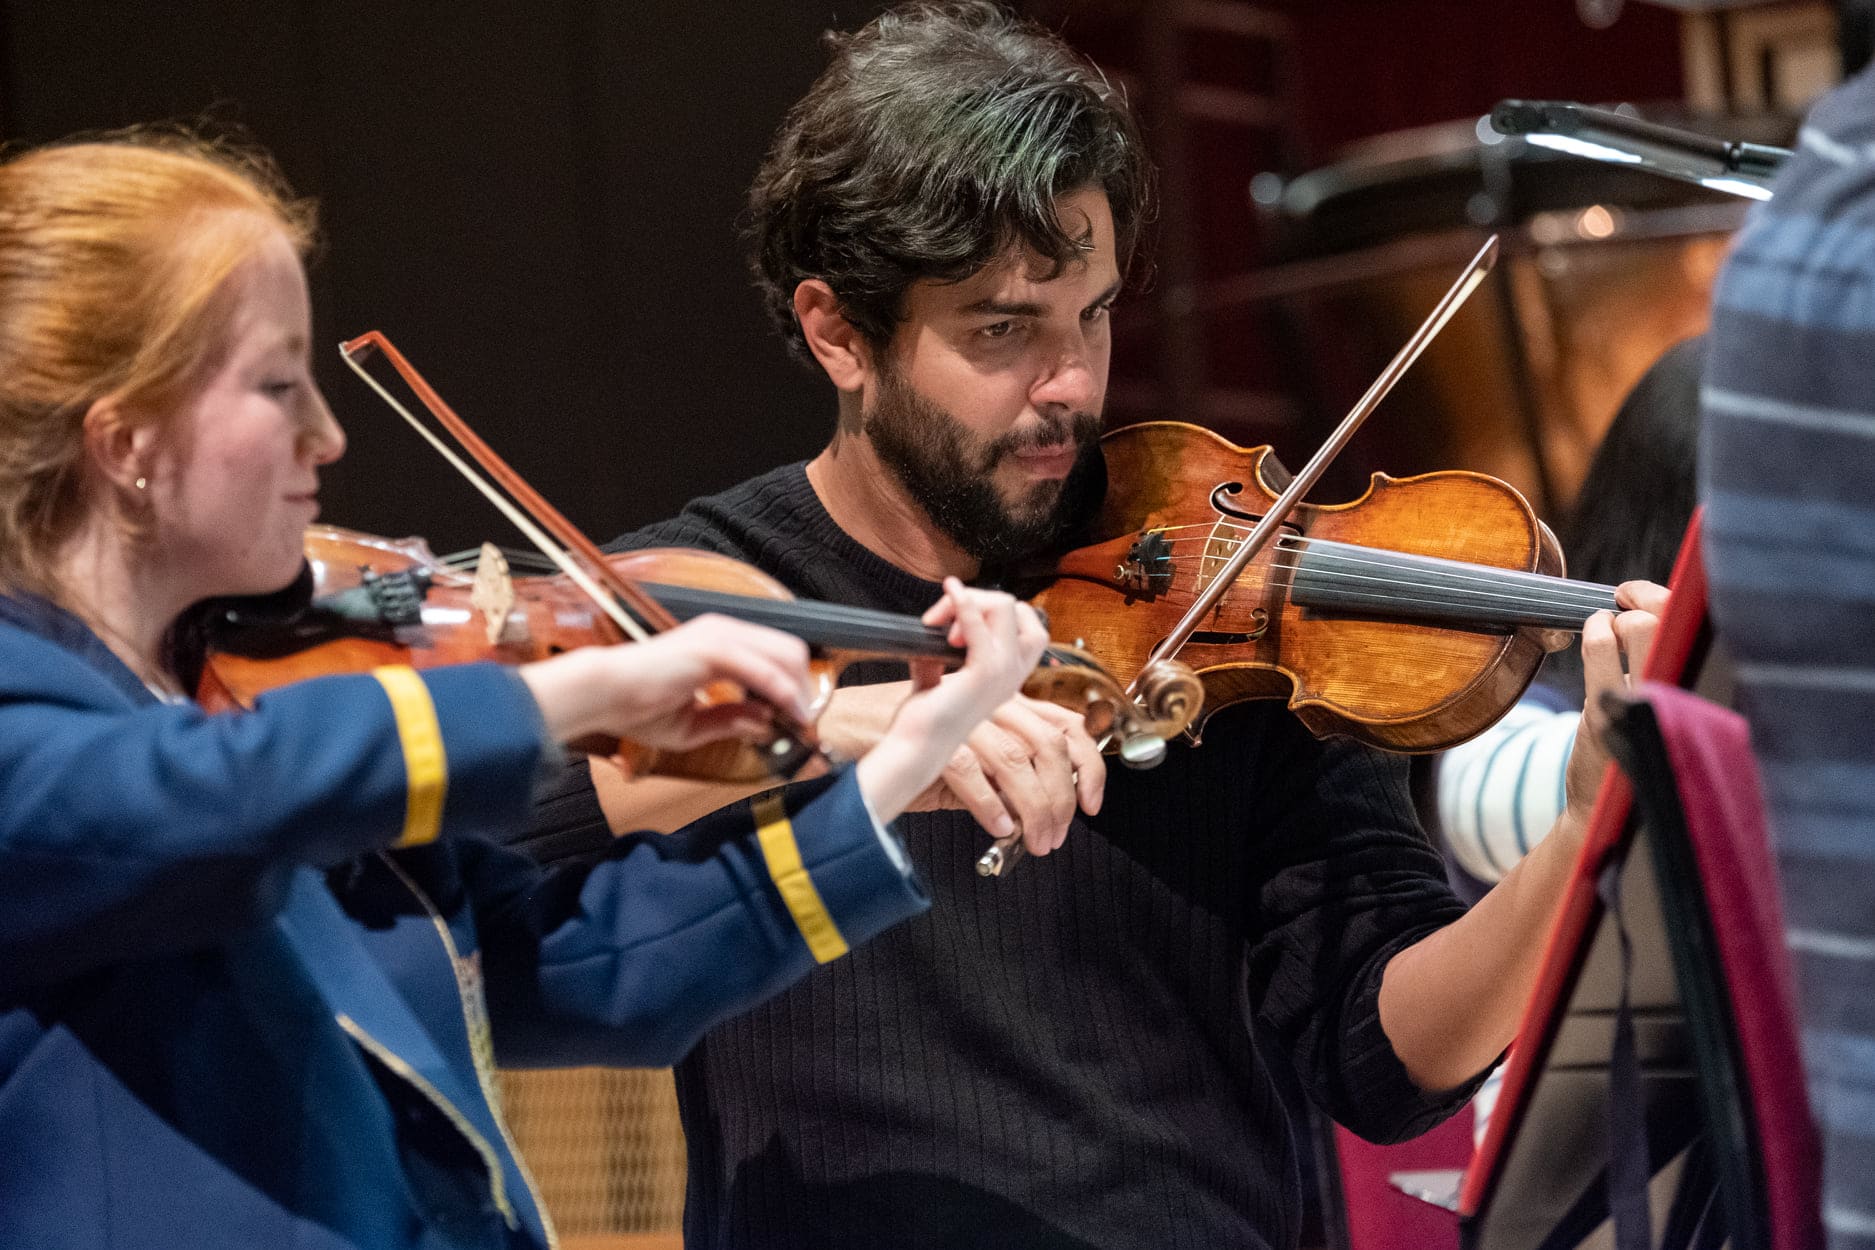 Music director prefers to play violin with youth orchestra